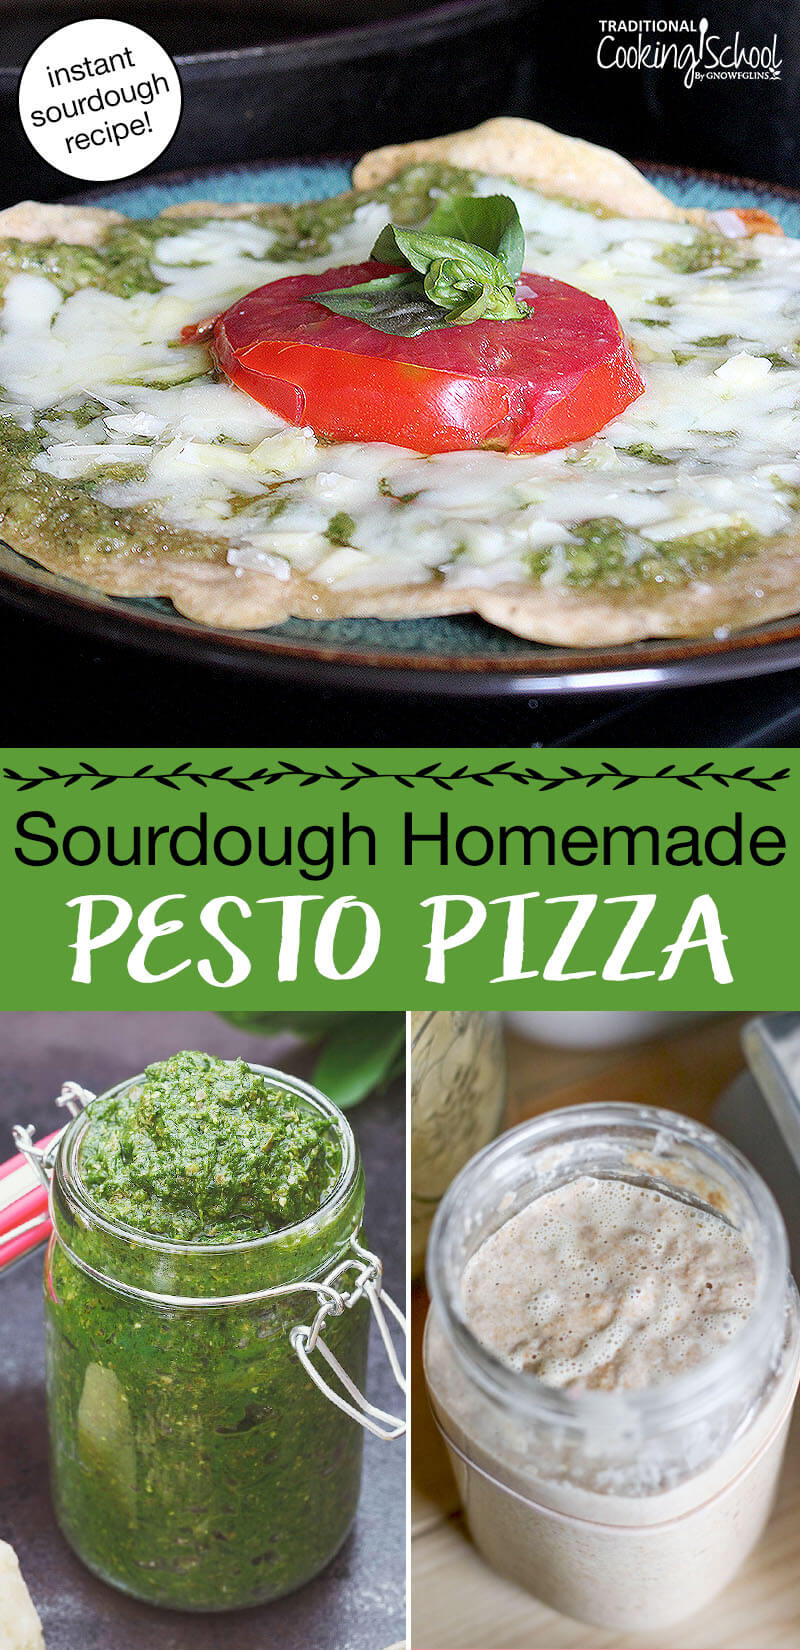 photo collage of pesto, sourdough starter, and cheesy, herbed pizza on a plate. Text overlay says: "Sourdough Homemade Pesto Pizza (instant sourdough recipe!)"